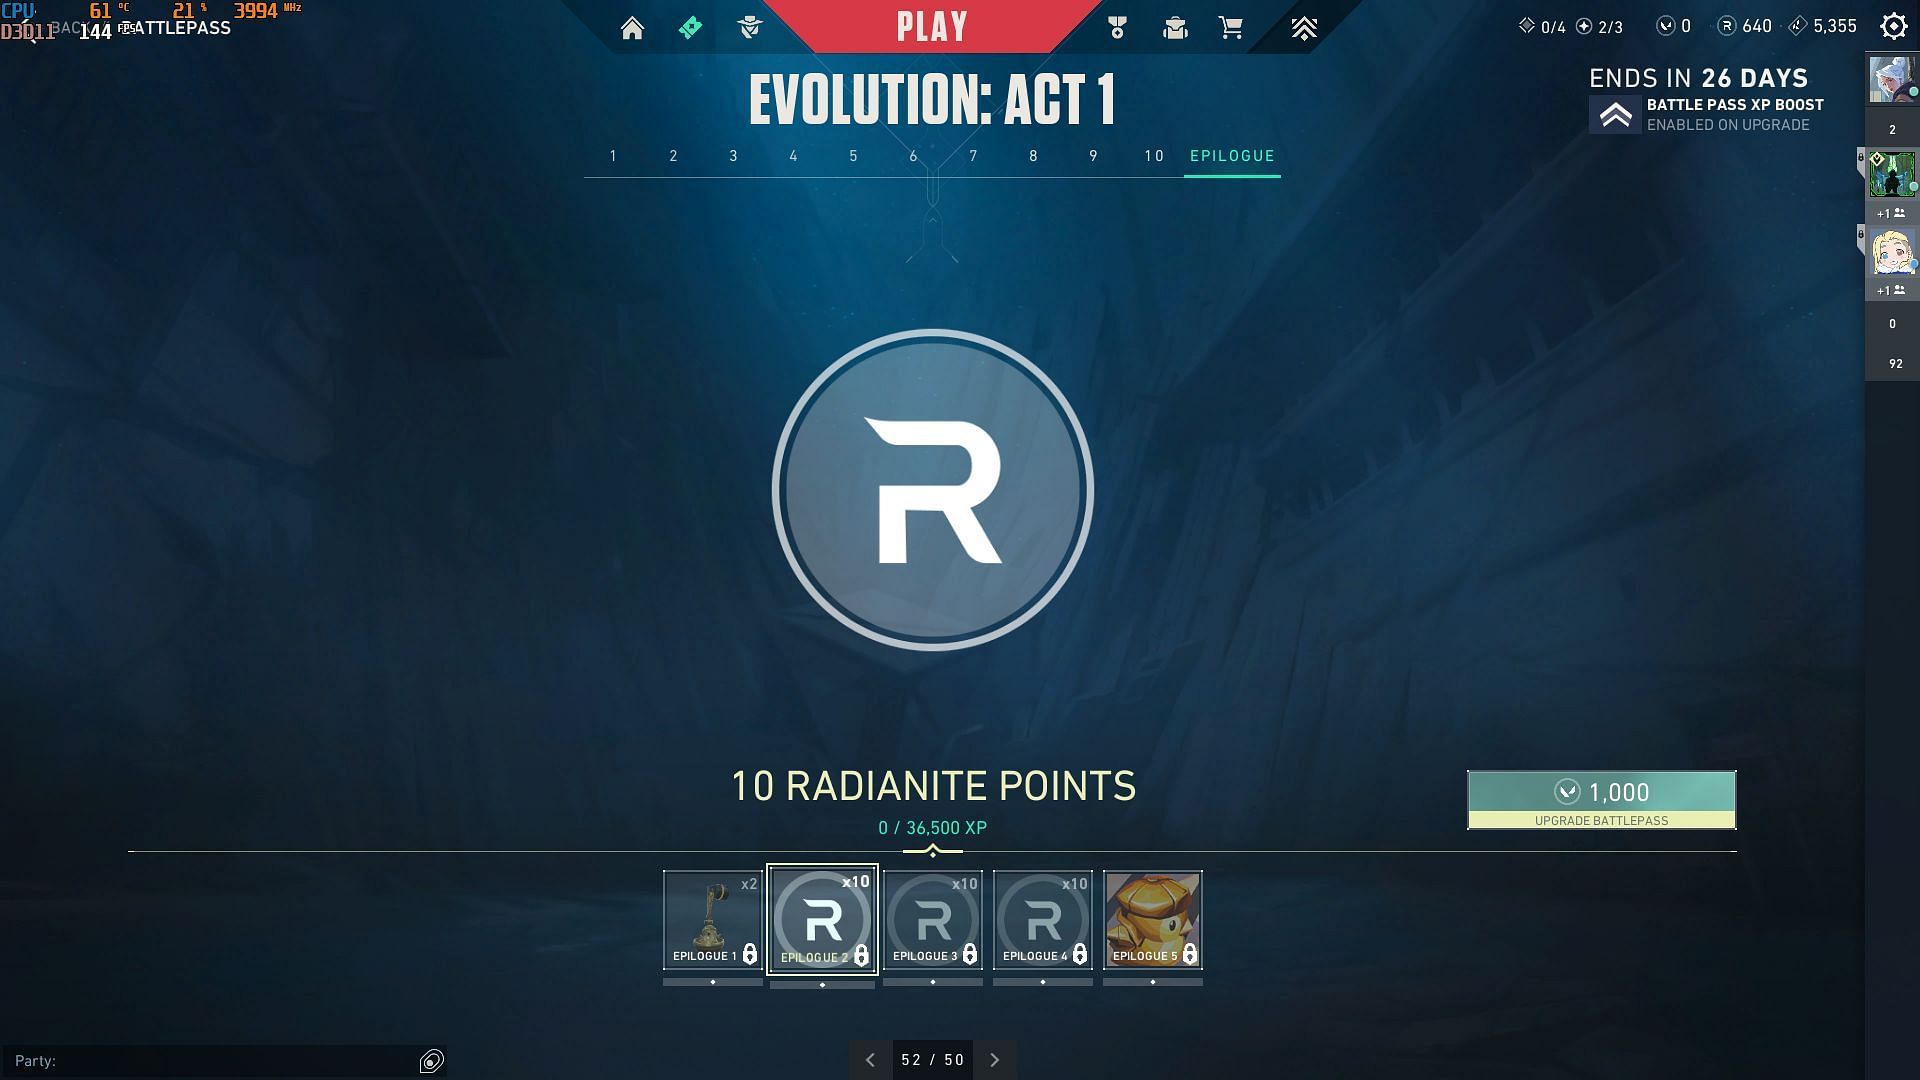 How to get free Radianite Points in Valorant